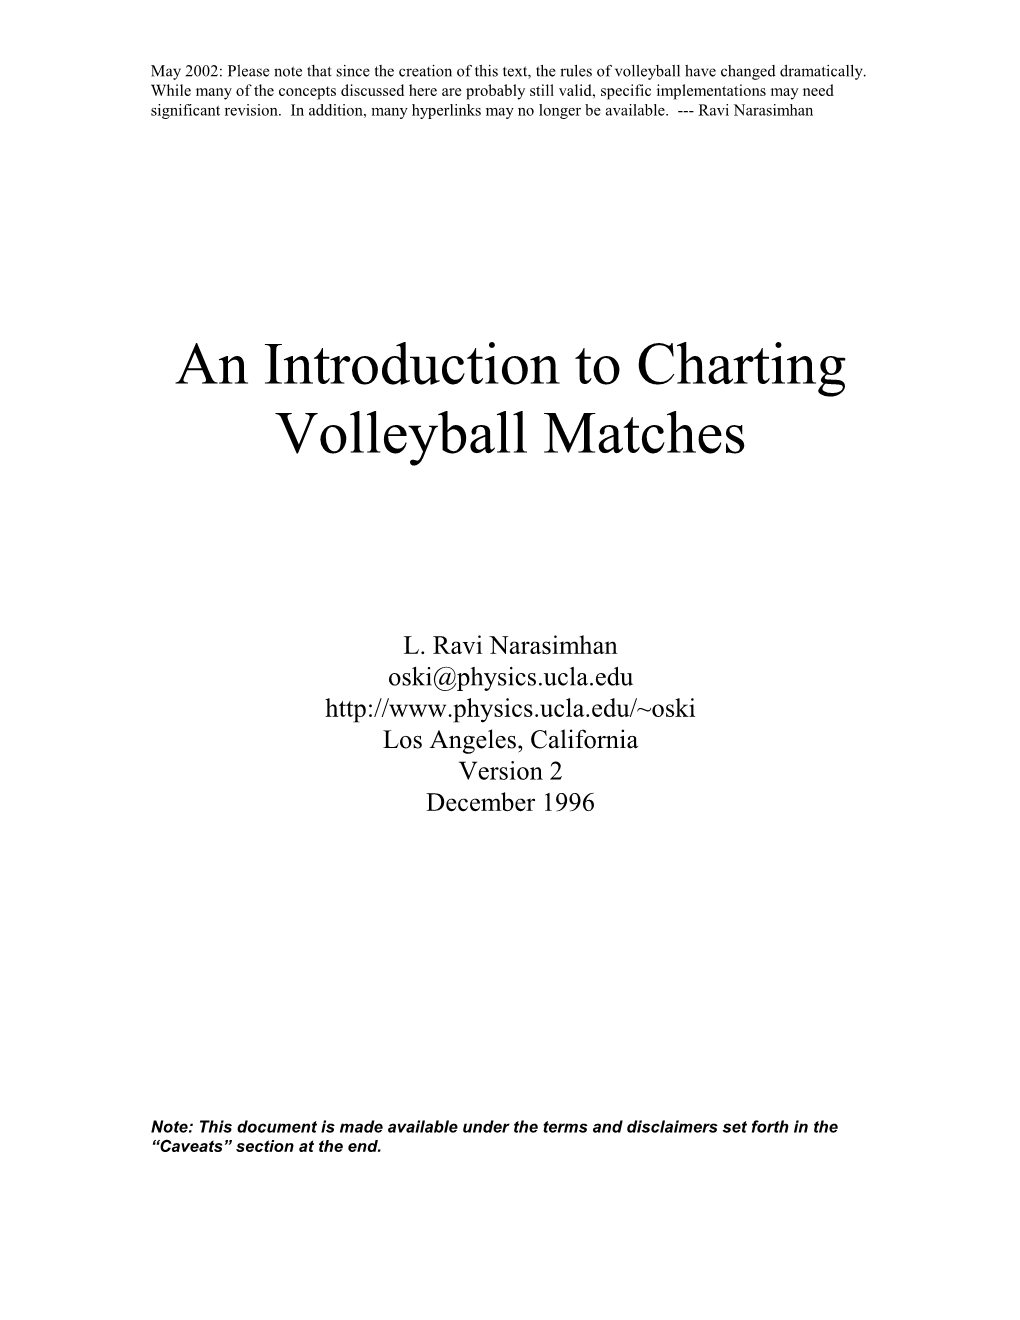 An Introduction to Charting Volleyball Matches